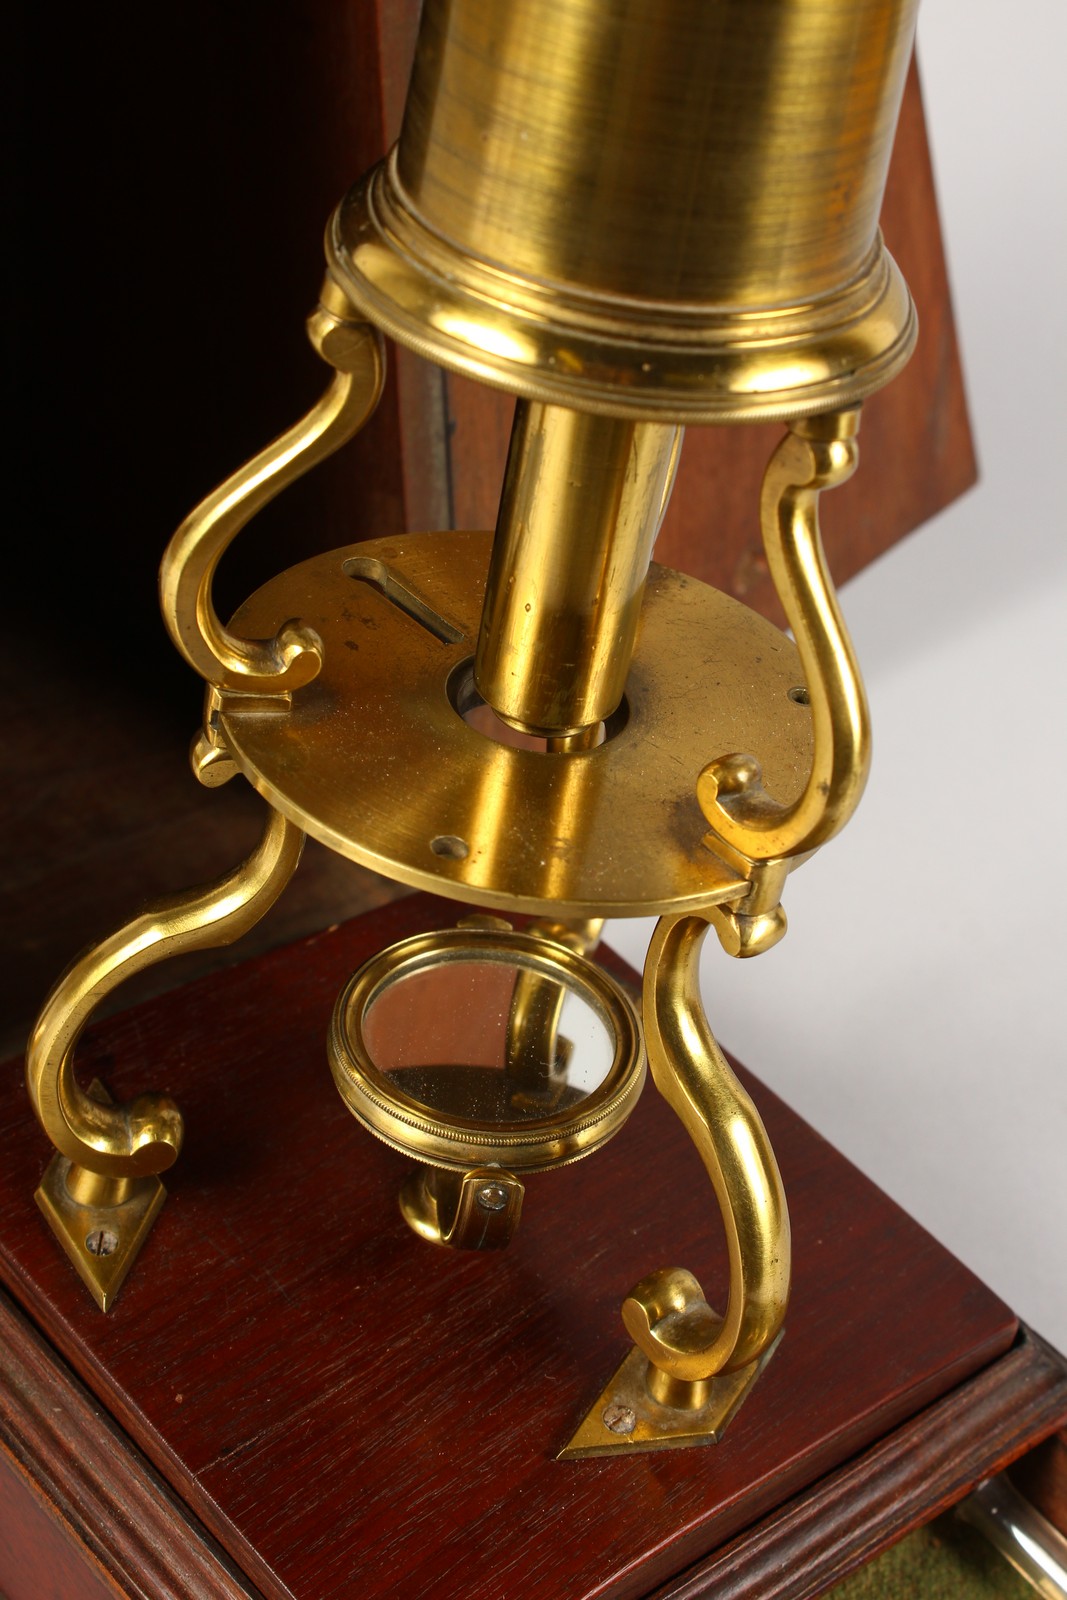 AN 18TH CENTURY BRASS CULPEPER MICROSCOPE by LINCOLN, LONDON, in an oak case, the sliding drawer - Image 3 of 10